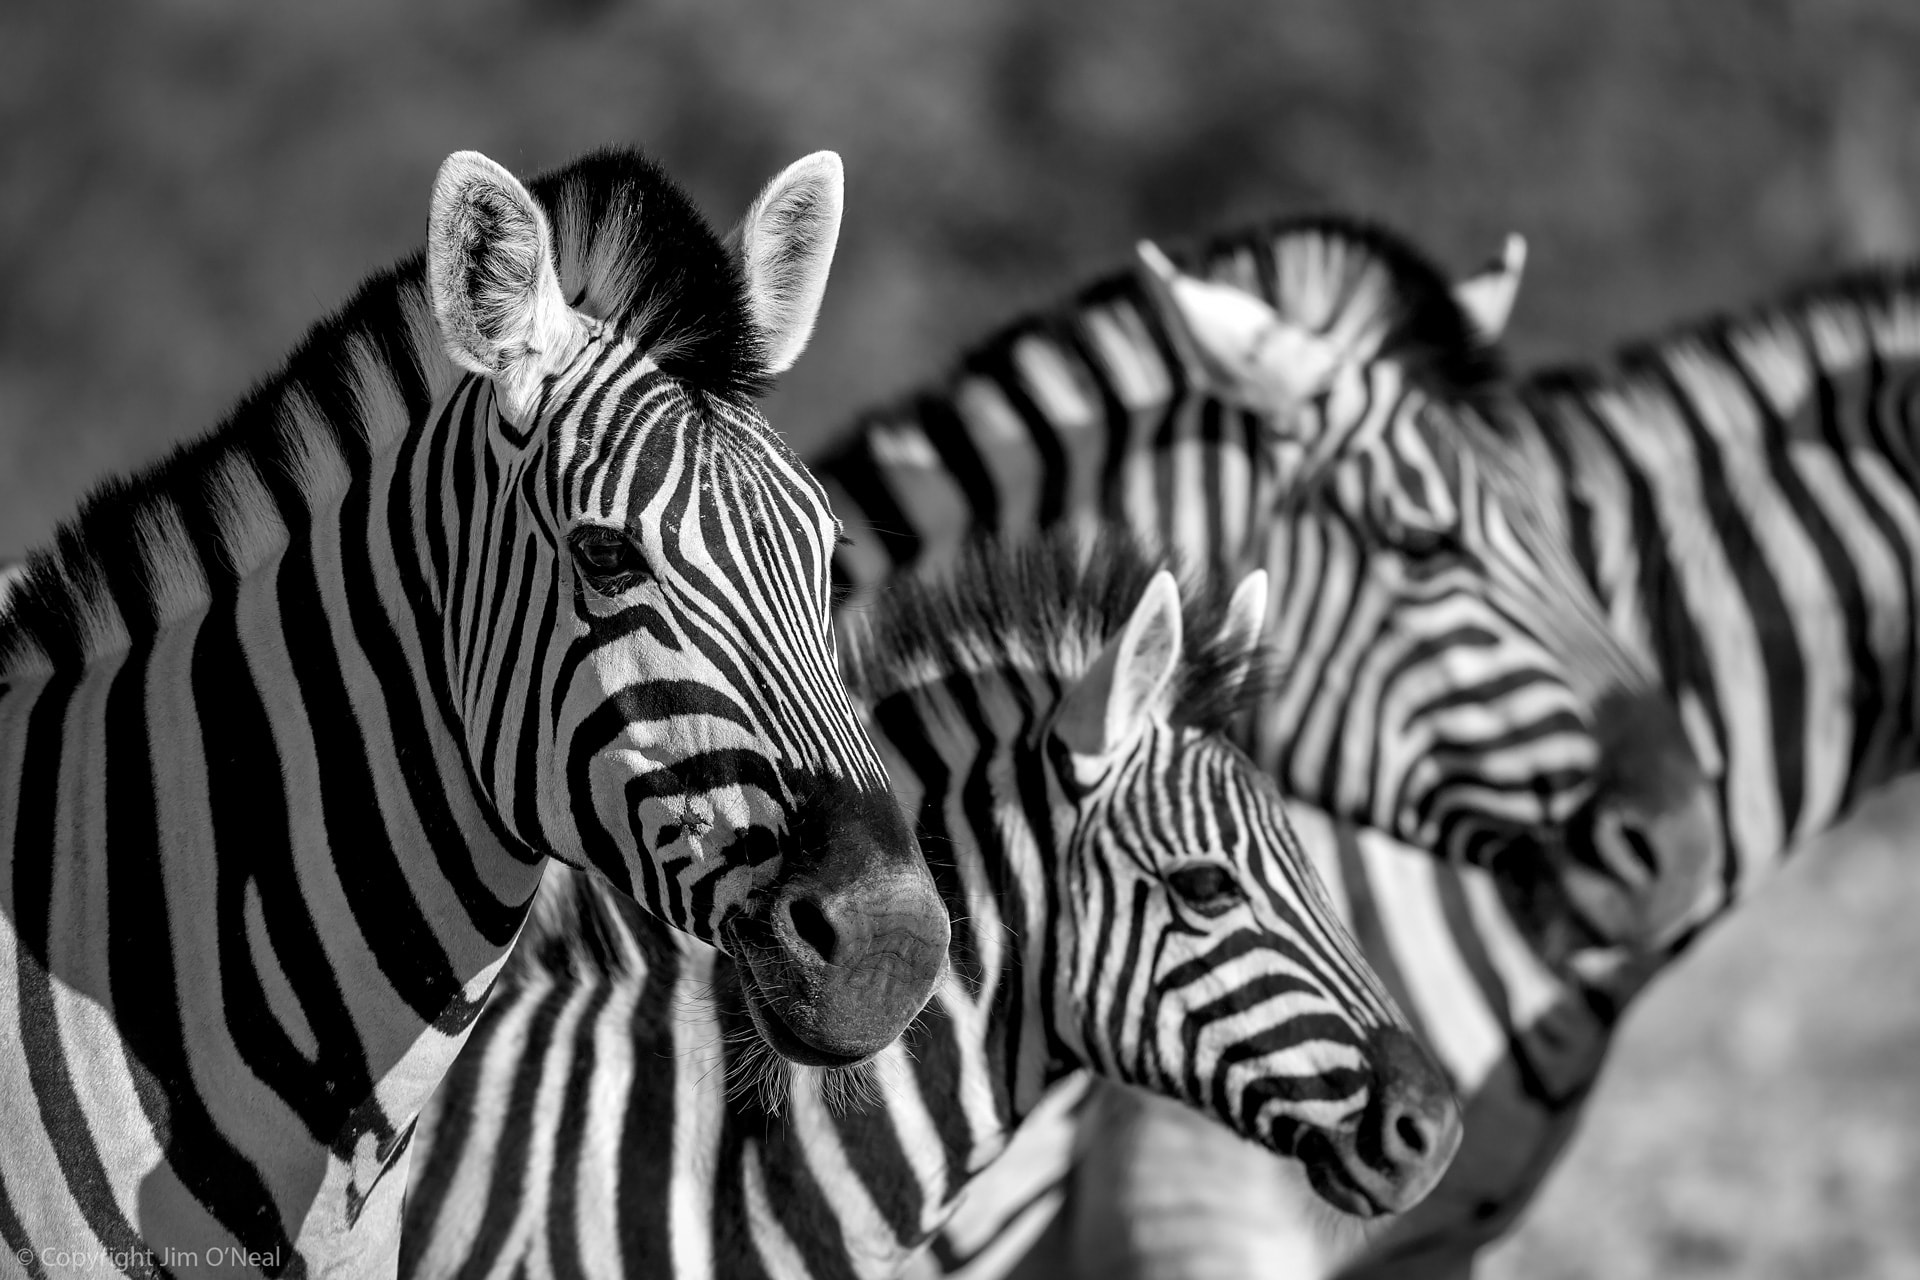 Timeless Africa: 12 Black and White Wildlife Images